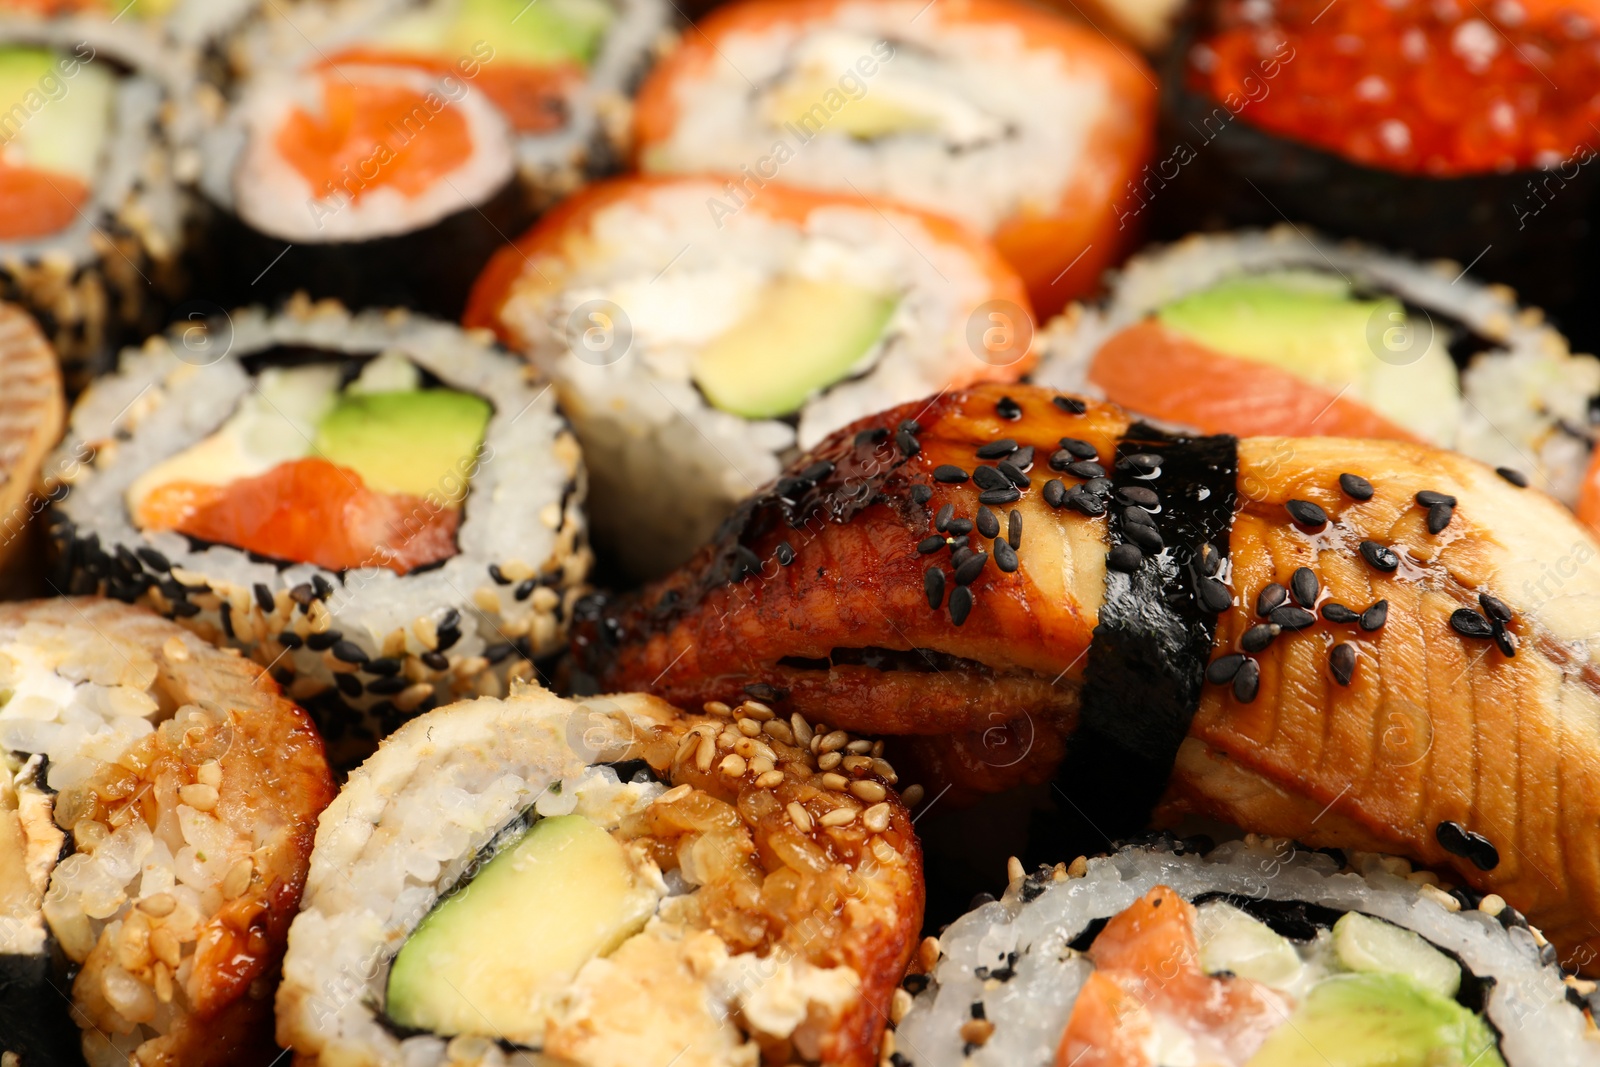 Photo of Different tasty sushi rolls as background, closeup